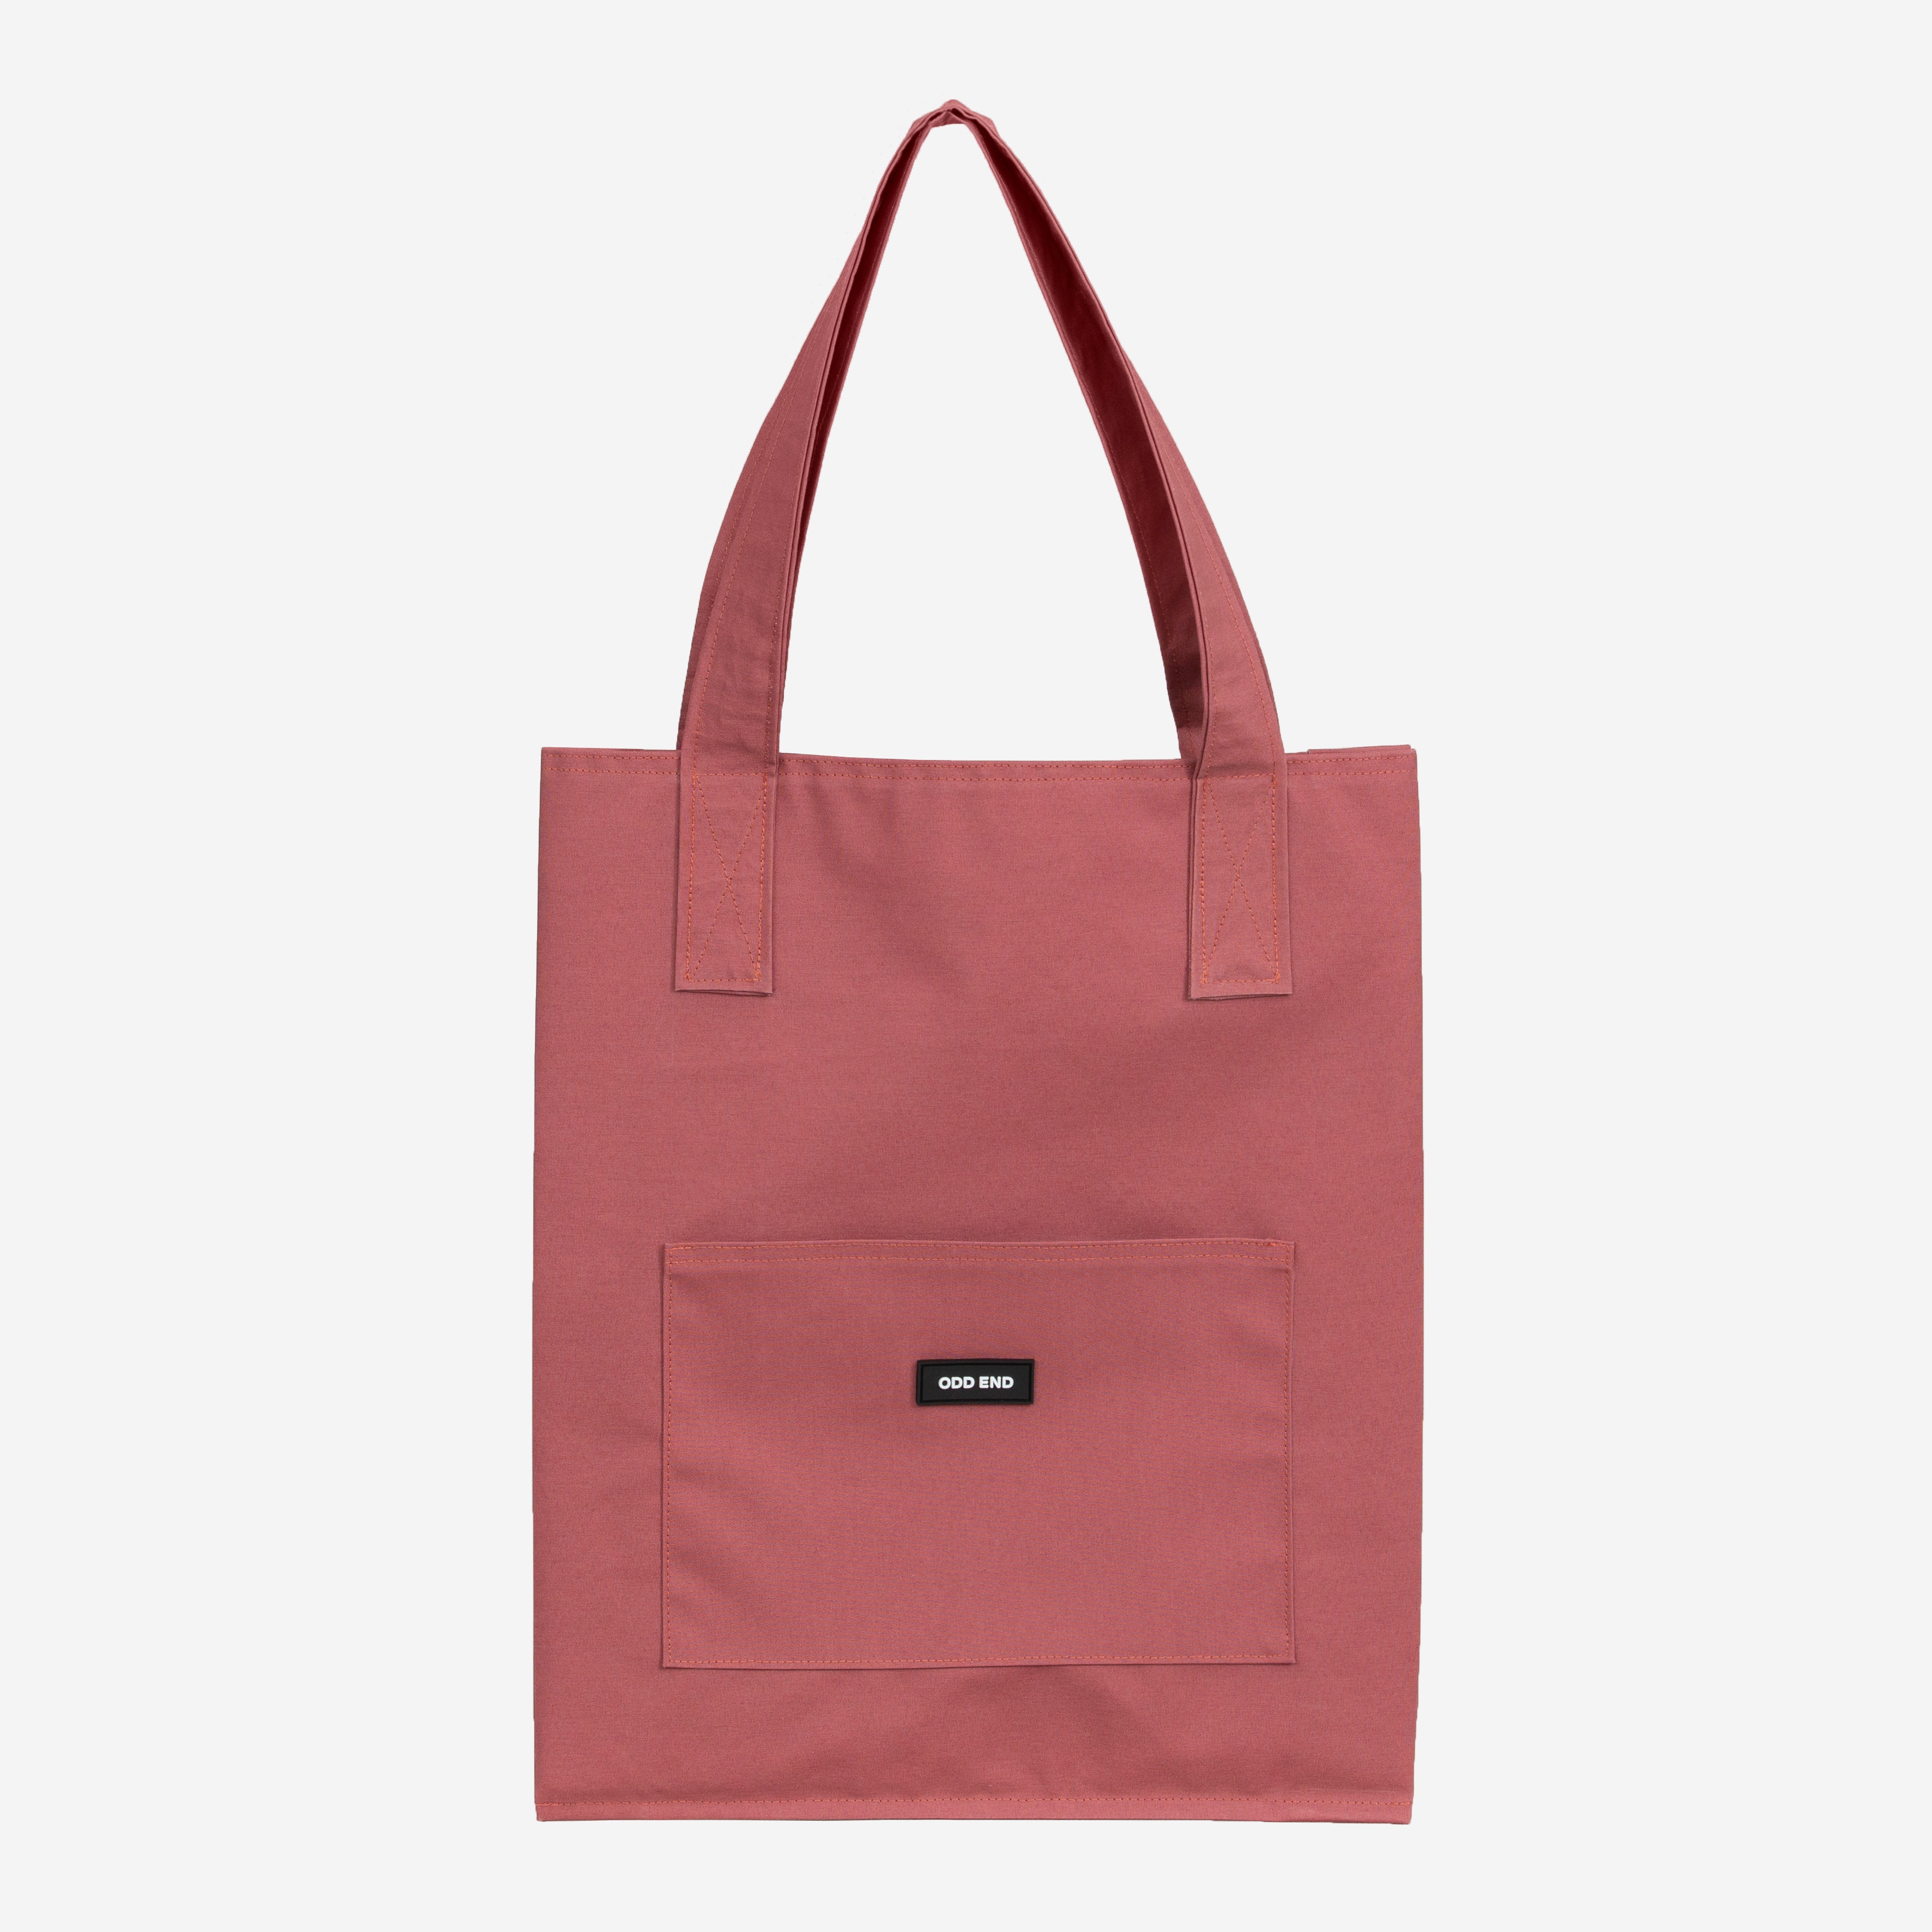 TALL Bag, Dusty Red